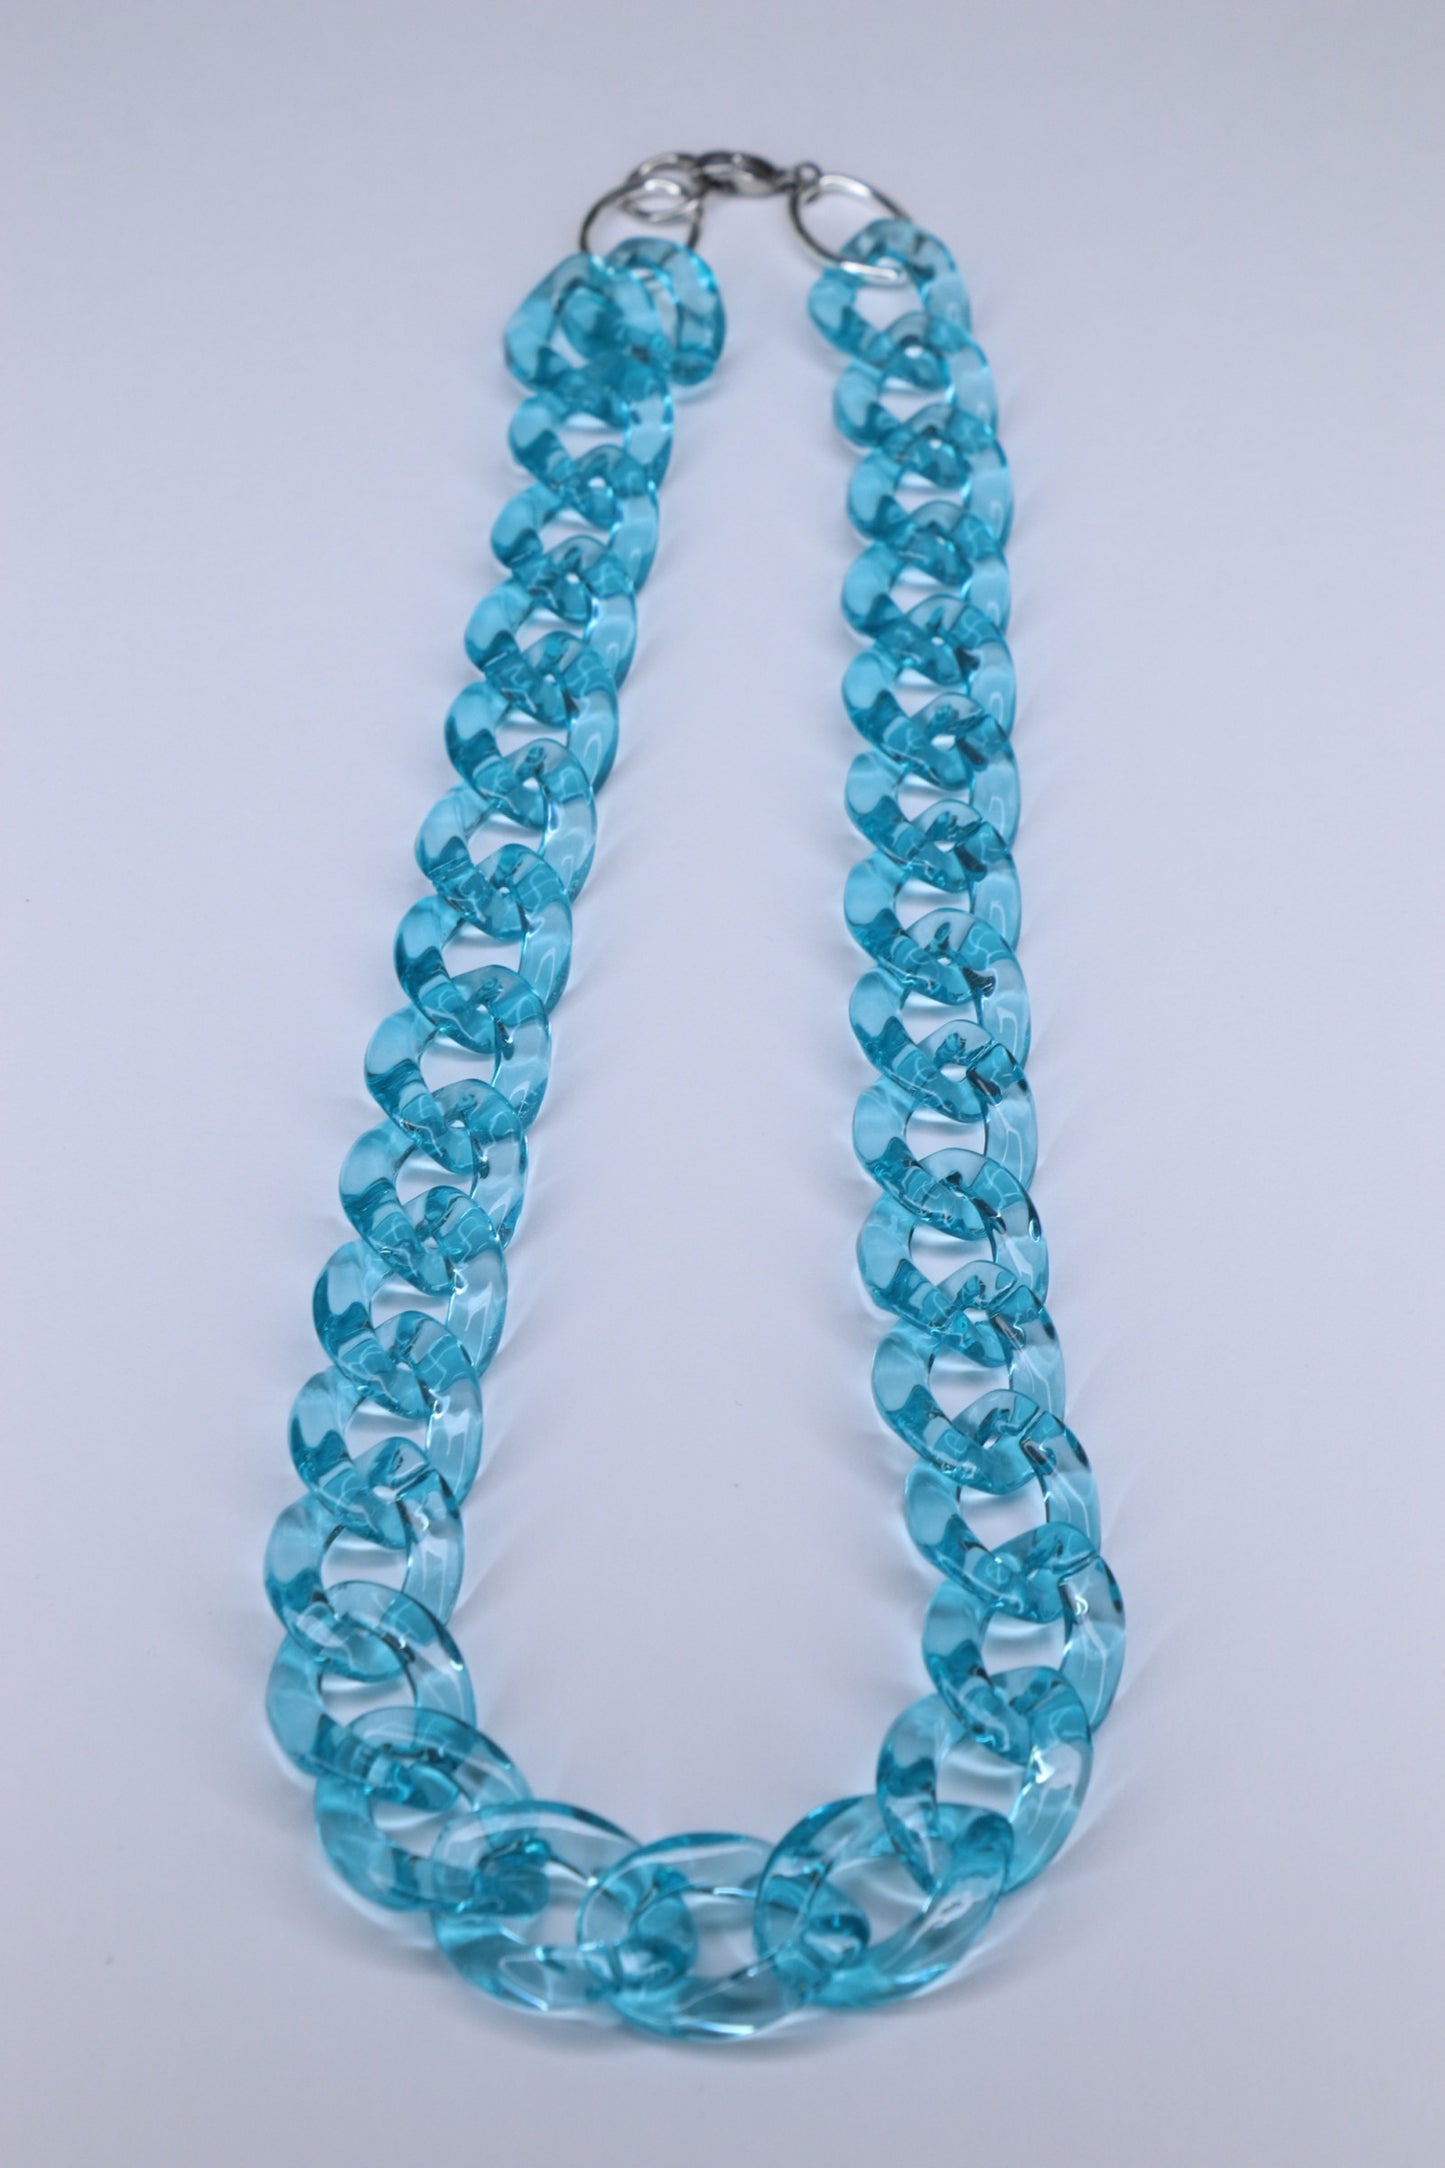 BLUE CANDY FOR GROWNUPS NECKLACE